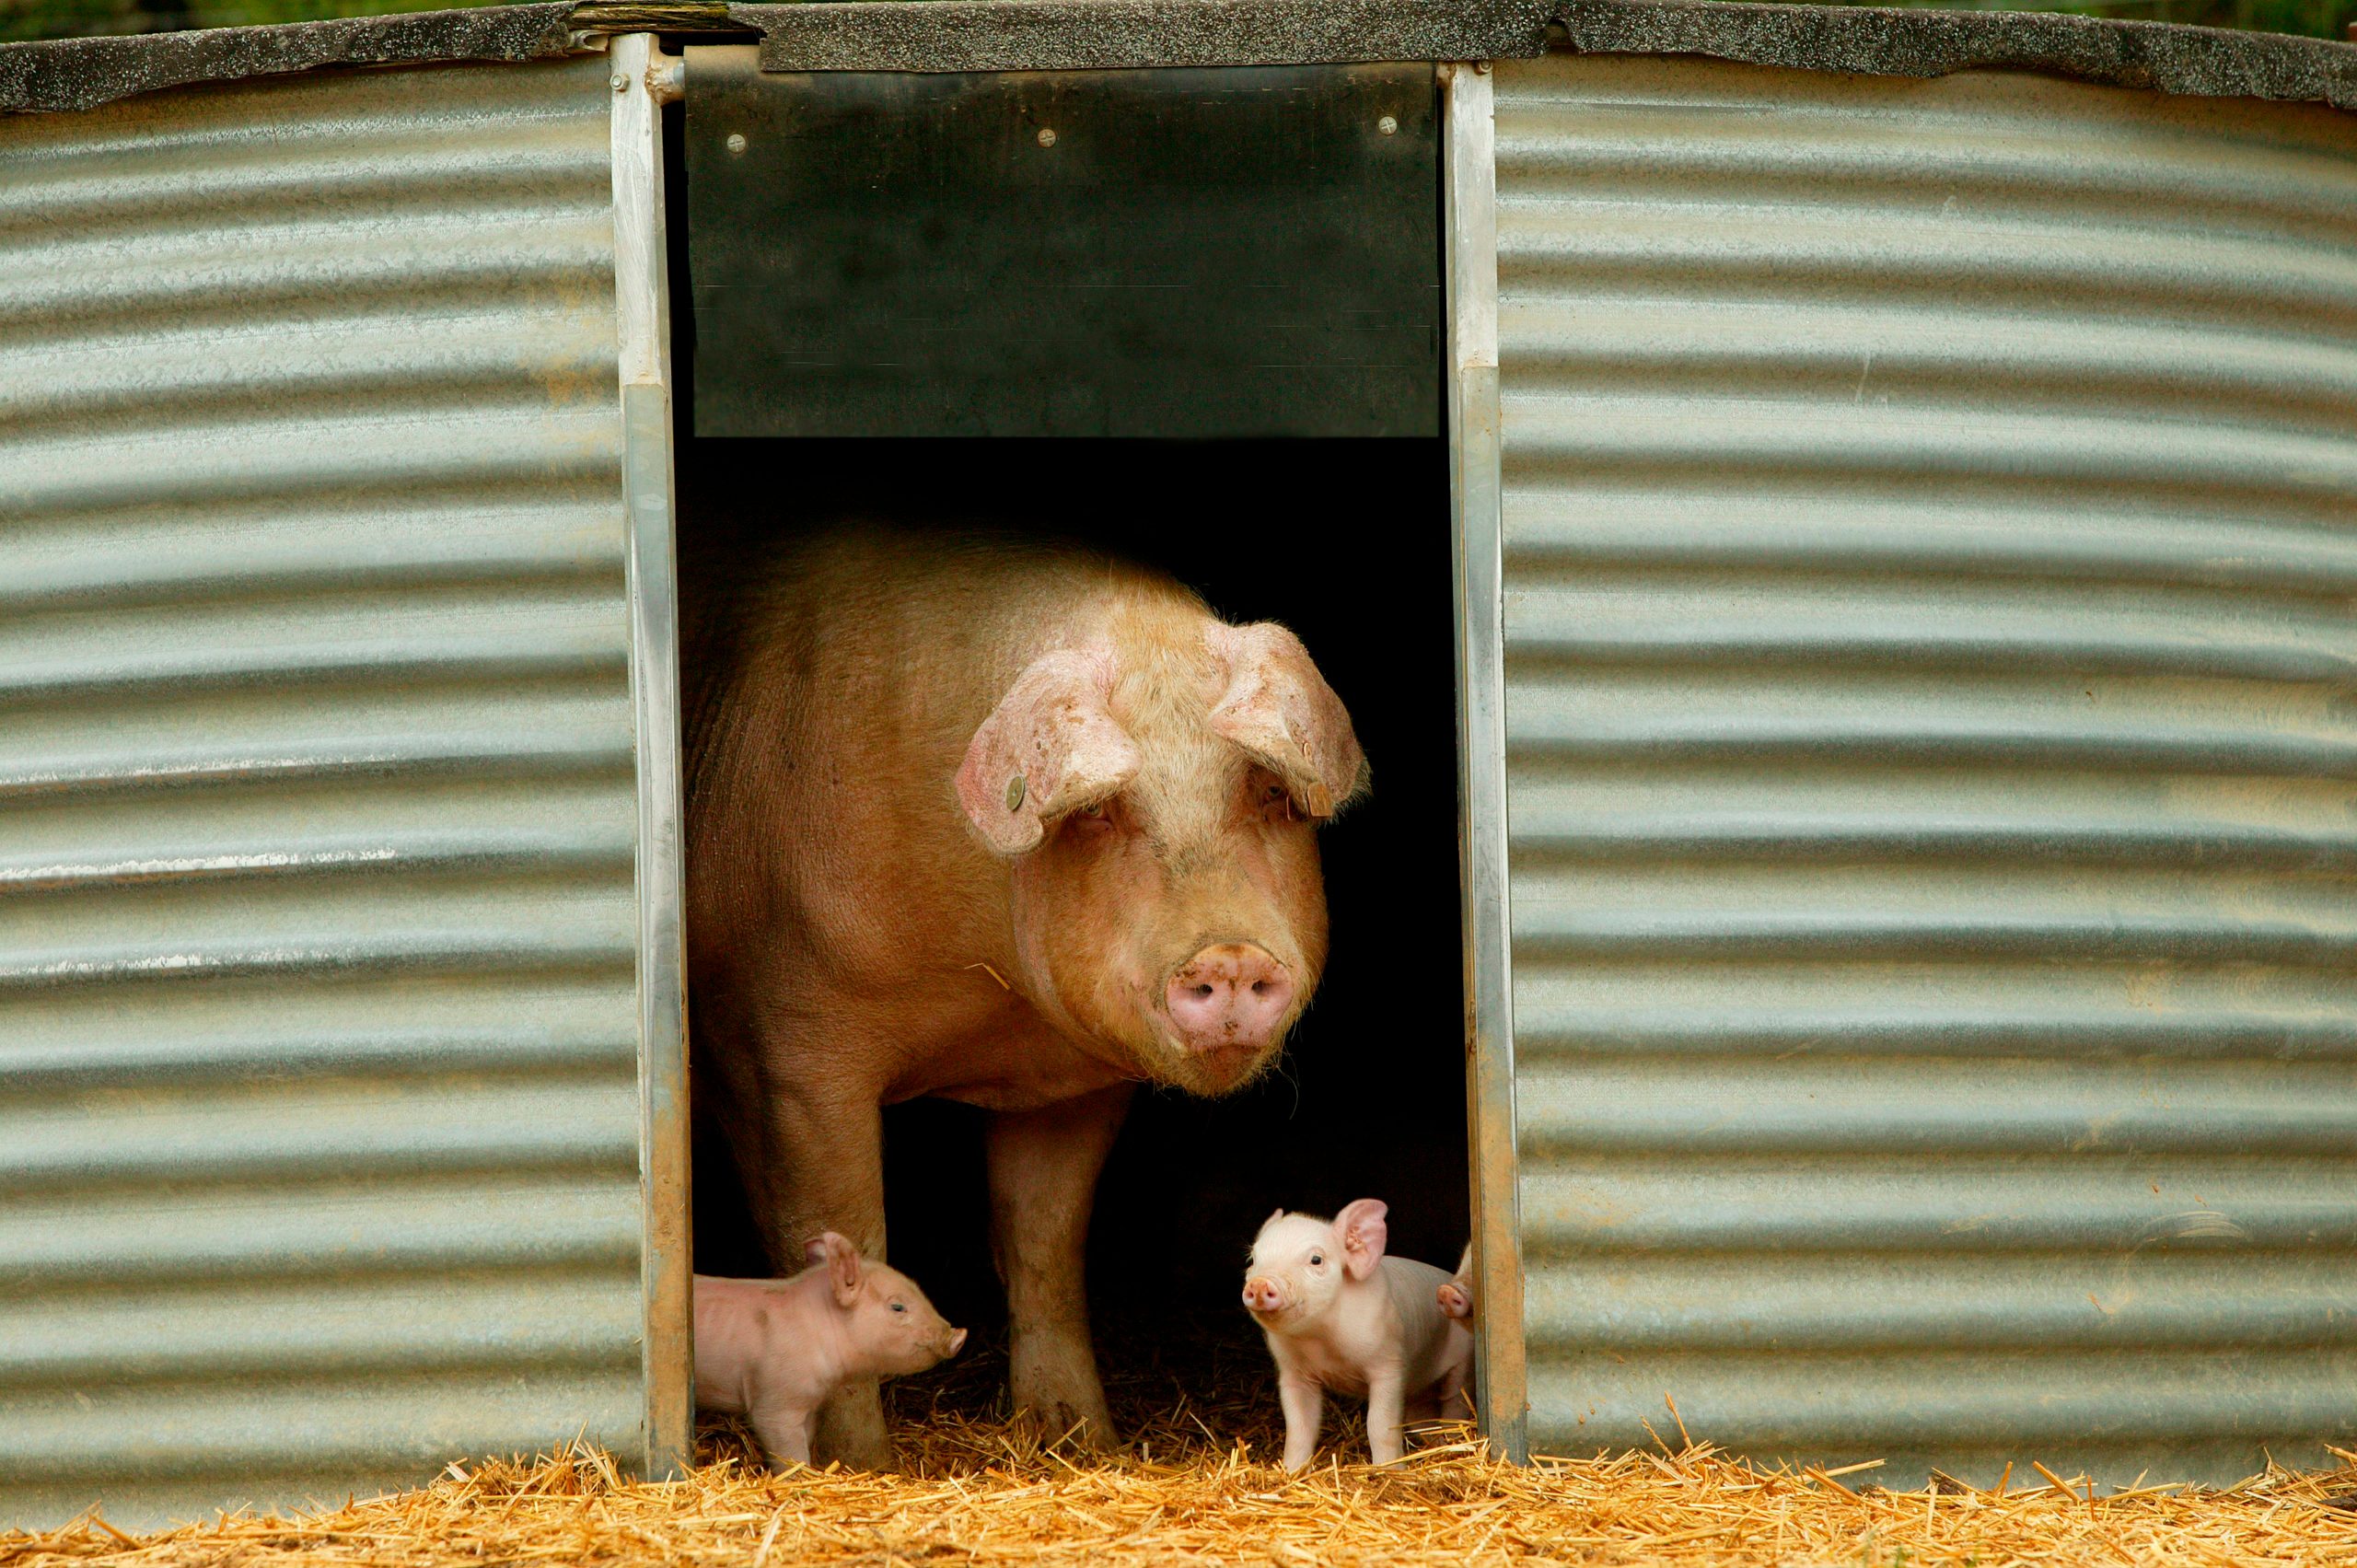 Large White pig and two piglets stand in a barn doorway